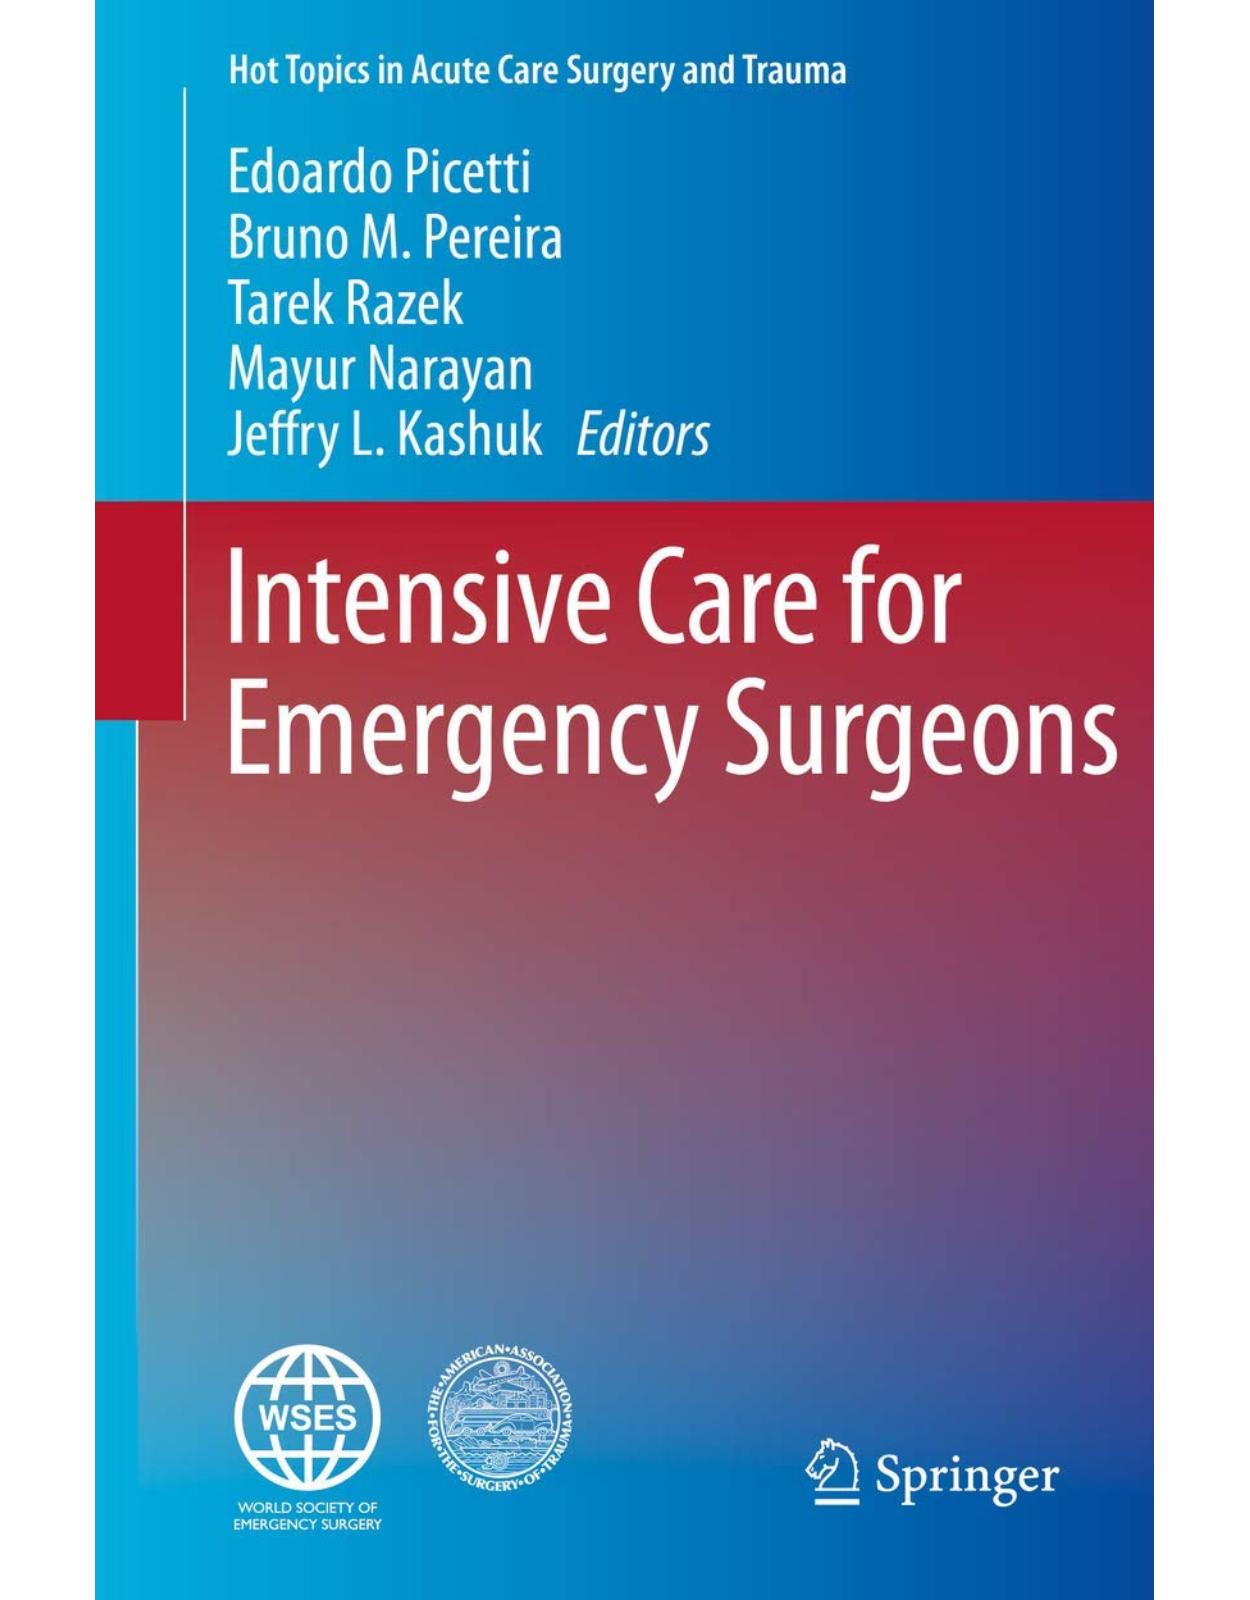 Intensive Care for Emergency Surgeons (Hot Topics in Acute Care Surgery and Trauma)